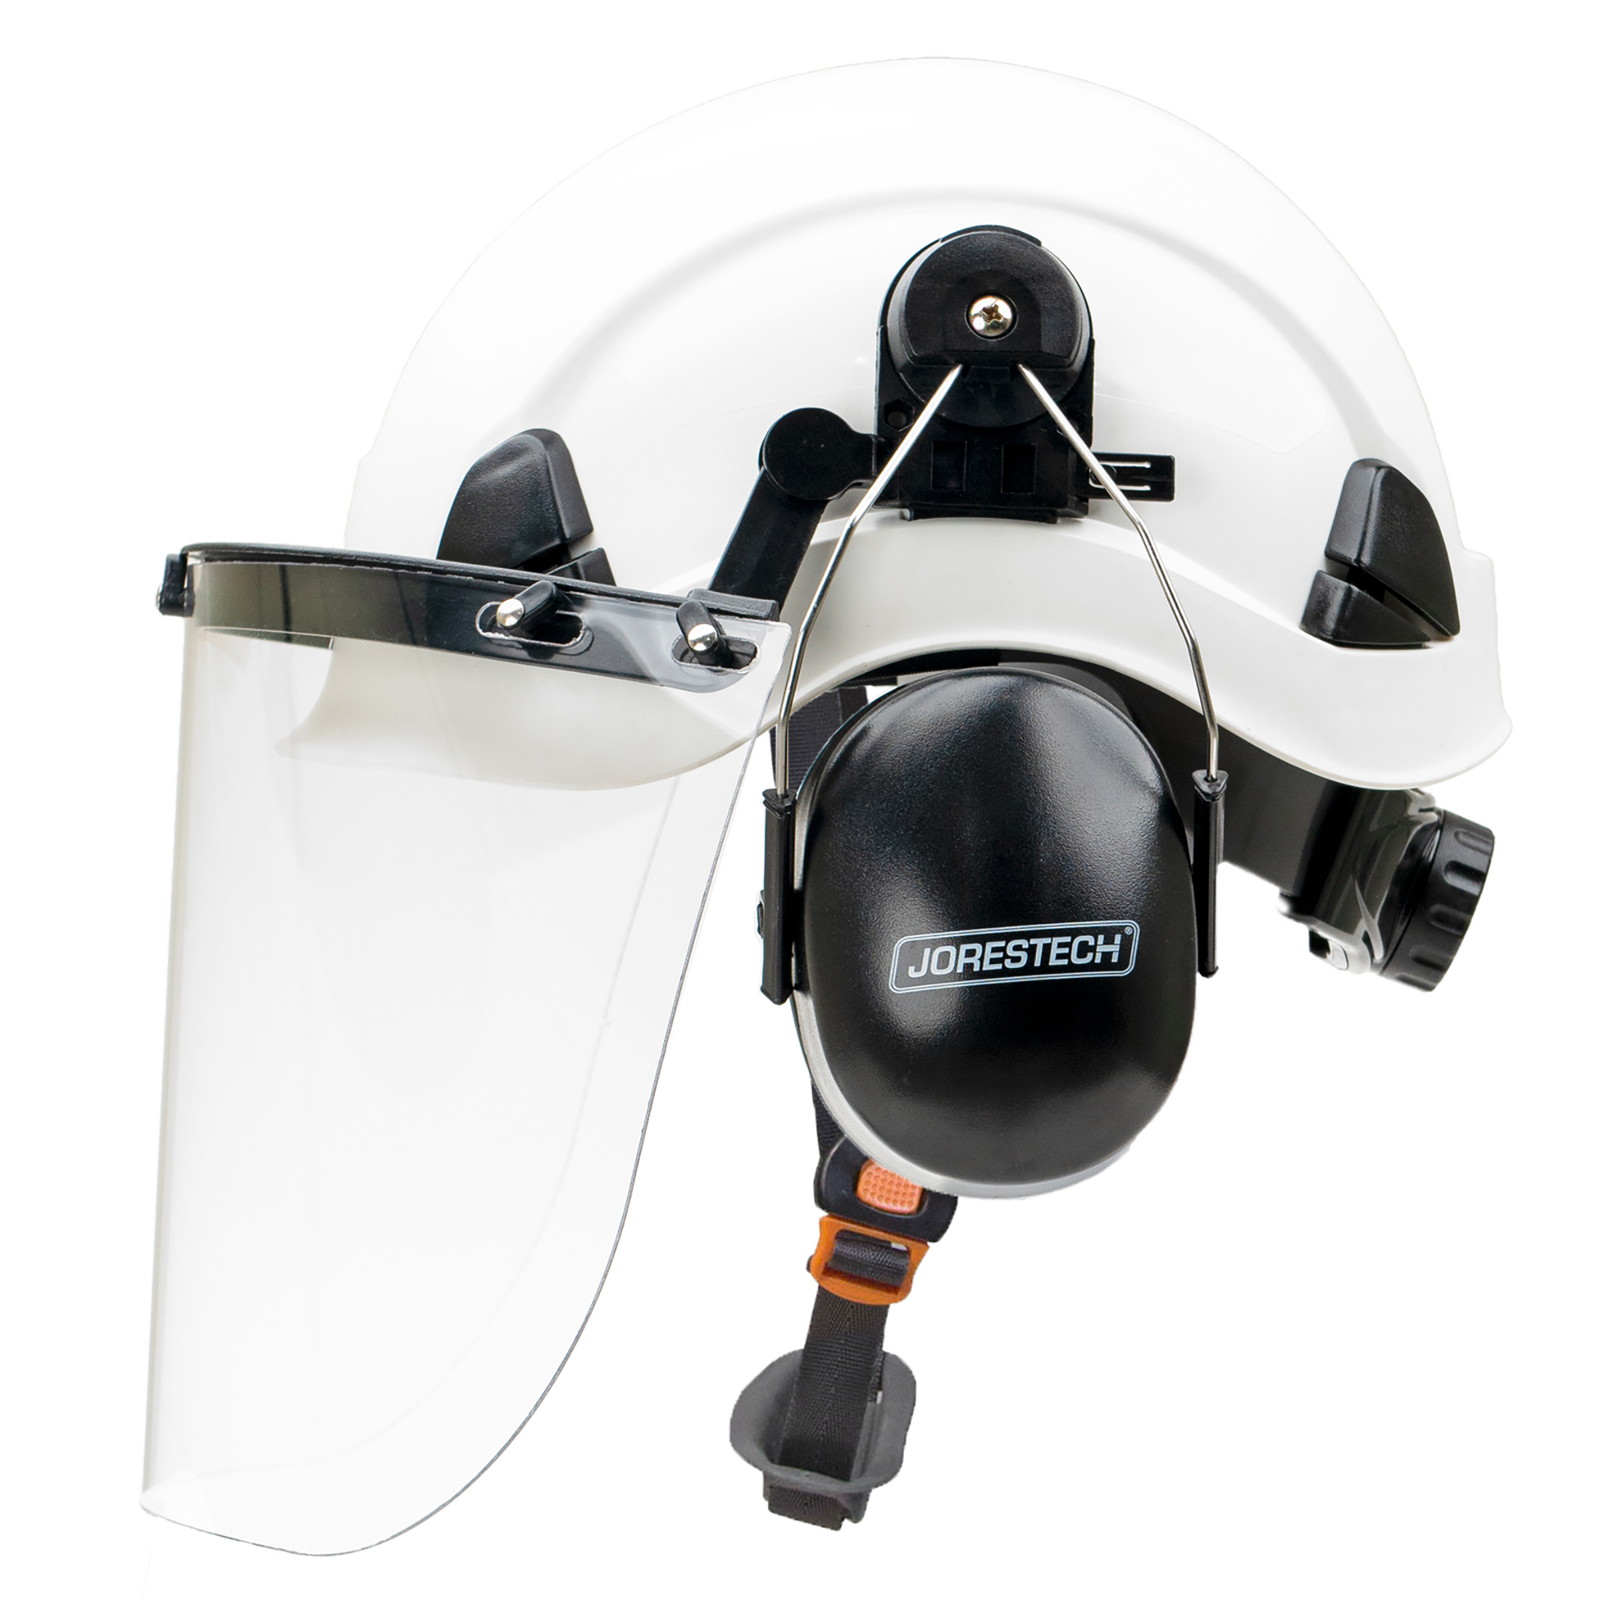 Side view of the Jorestech white 3-in-1 helmet system with mountable face shield and earmuffs